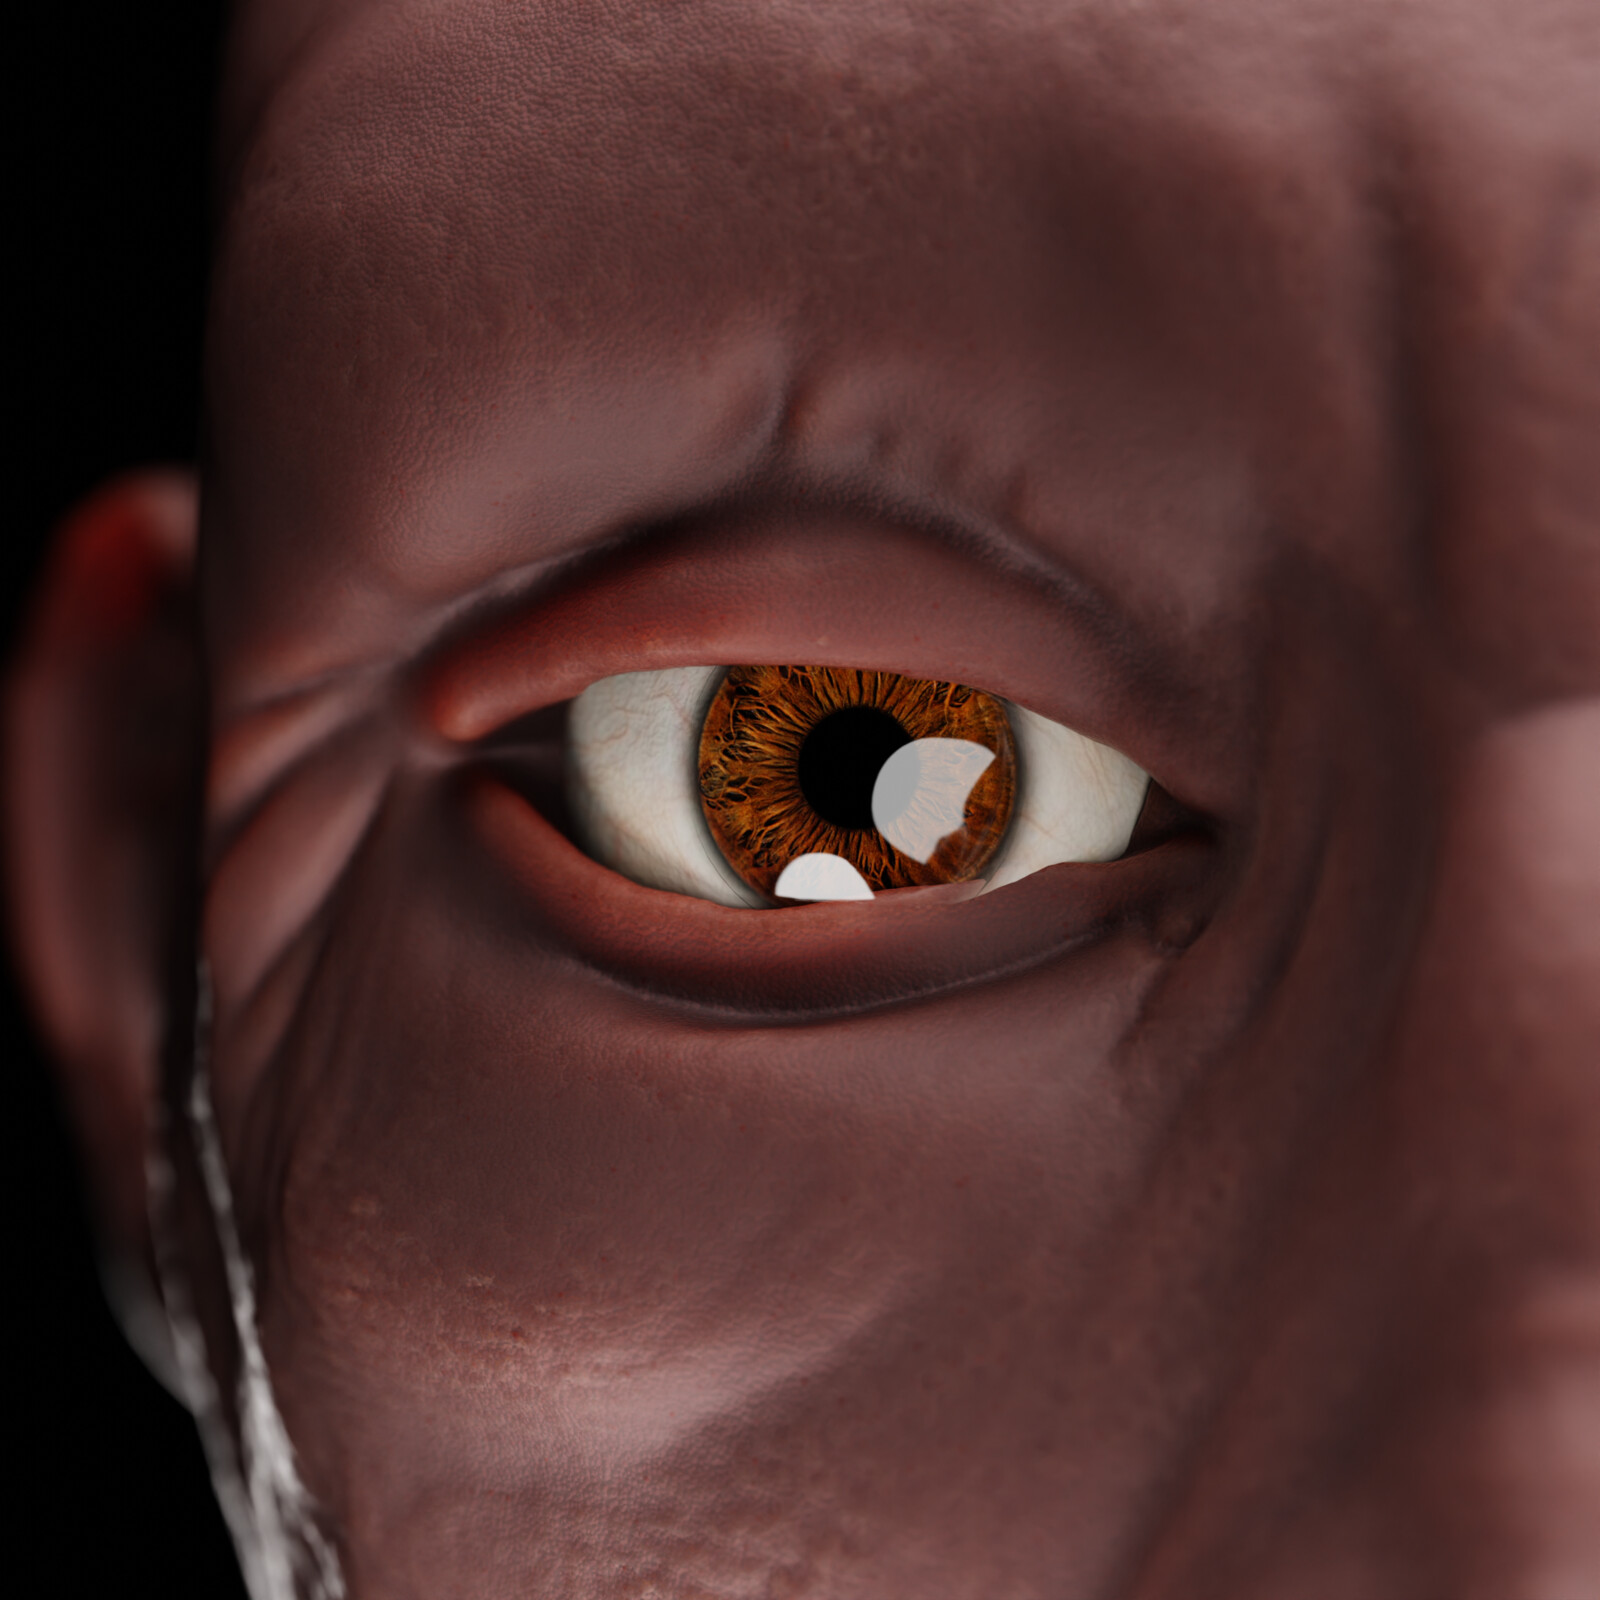 Again the eye here has an artifact on the left, but I didn't want to fix it since this was timed sculpting.